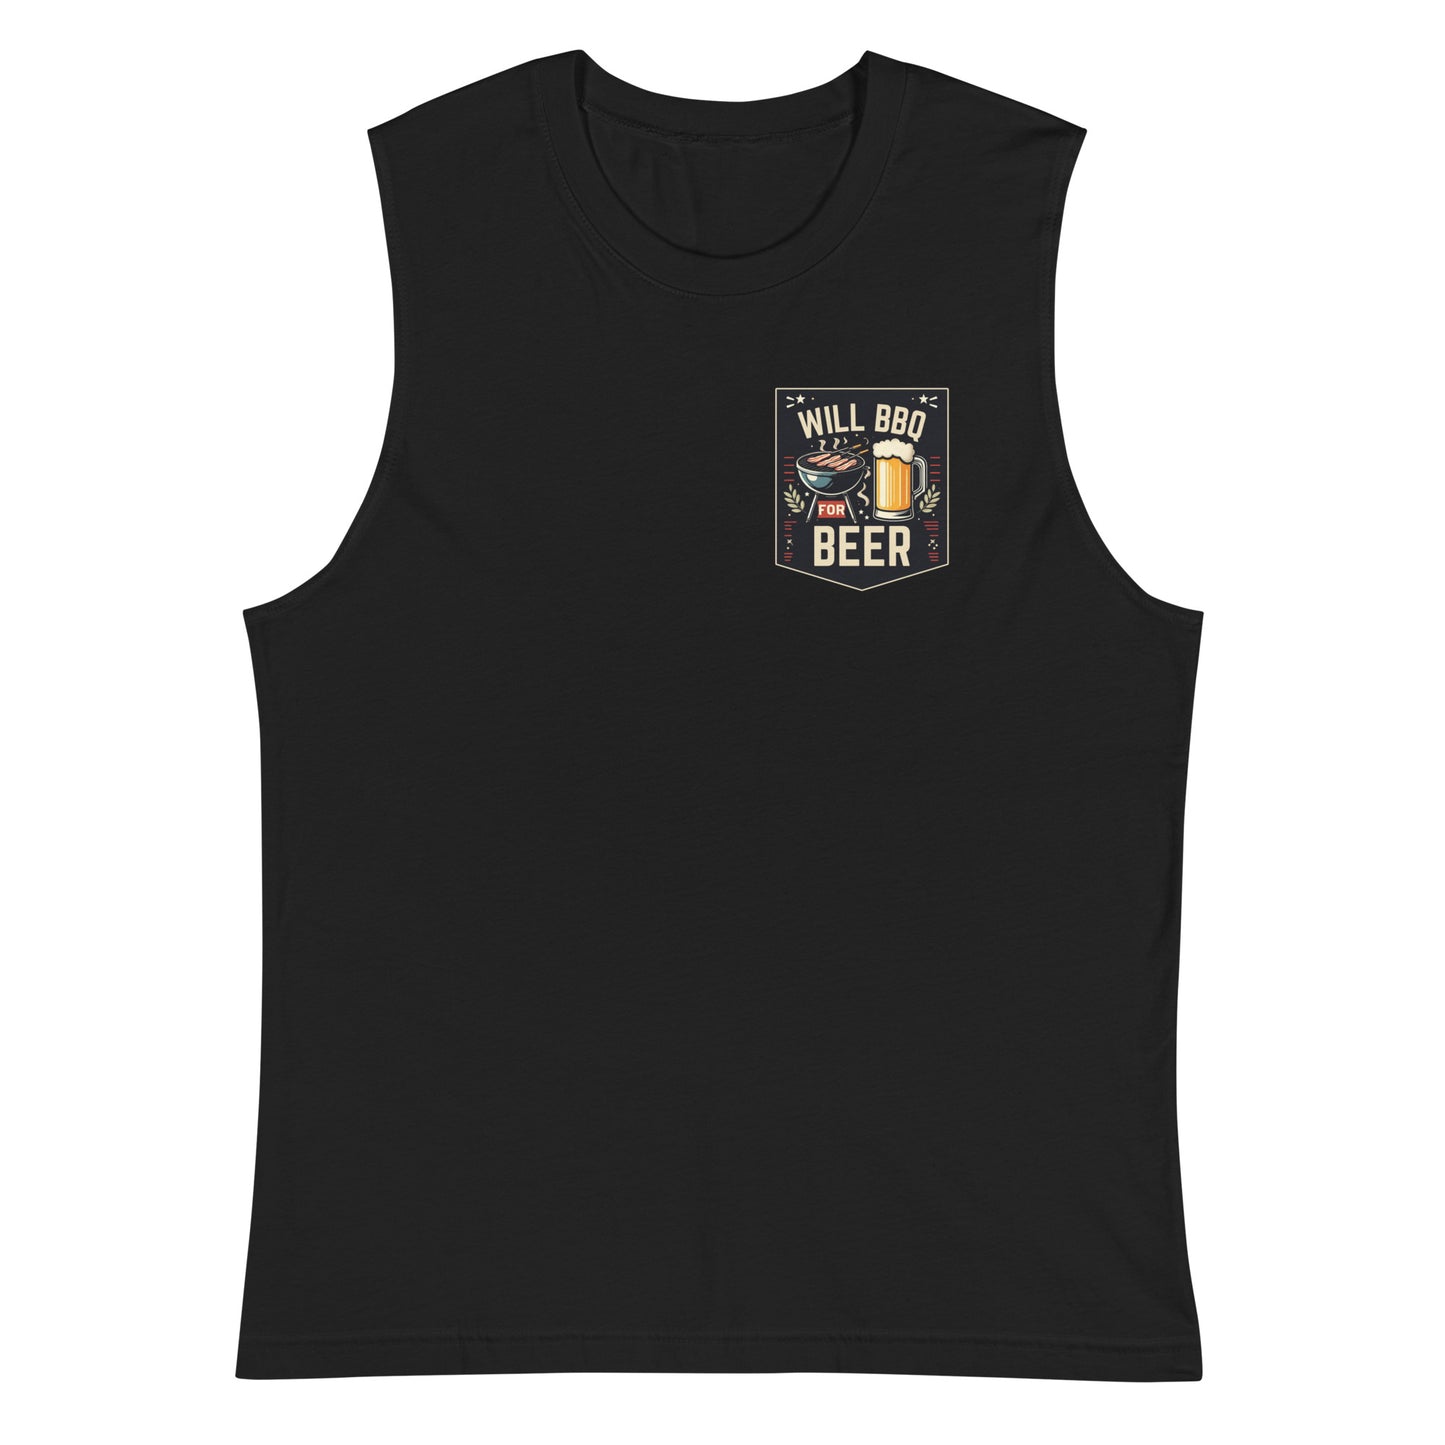 BBQ For Beer Muscle Tee